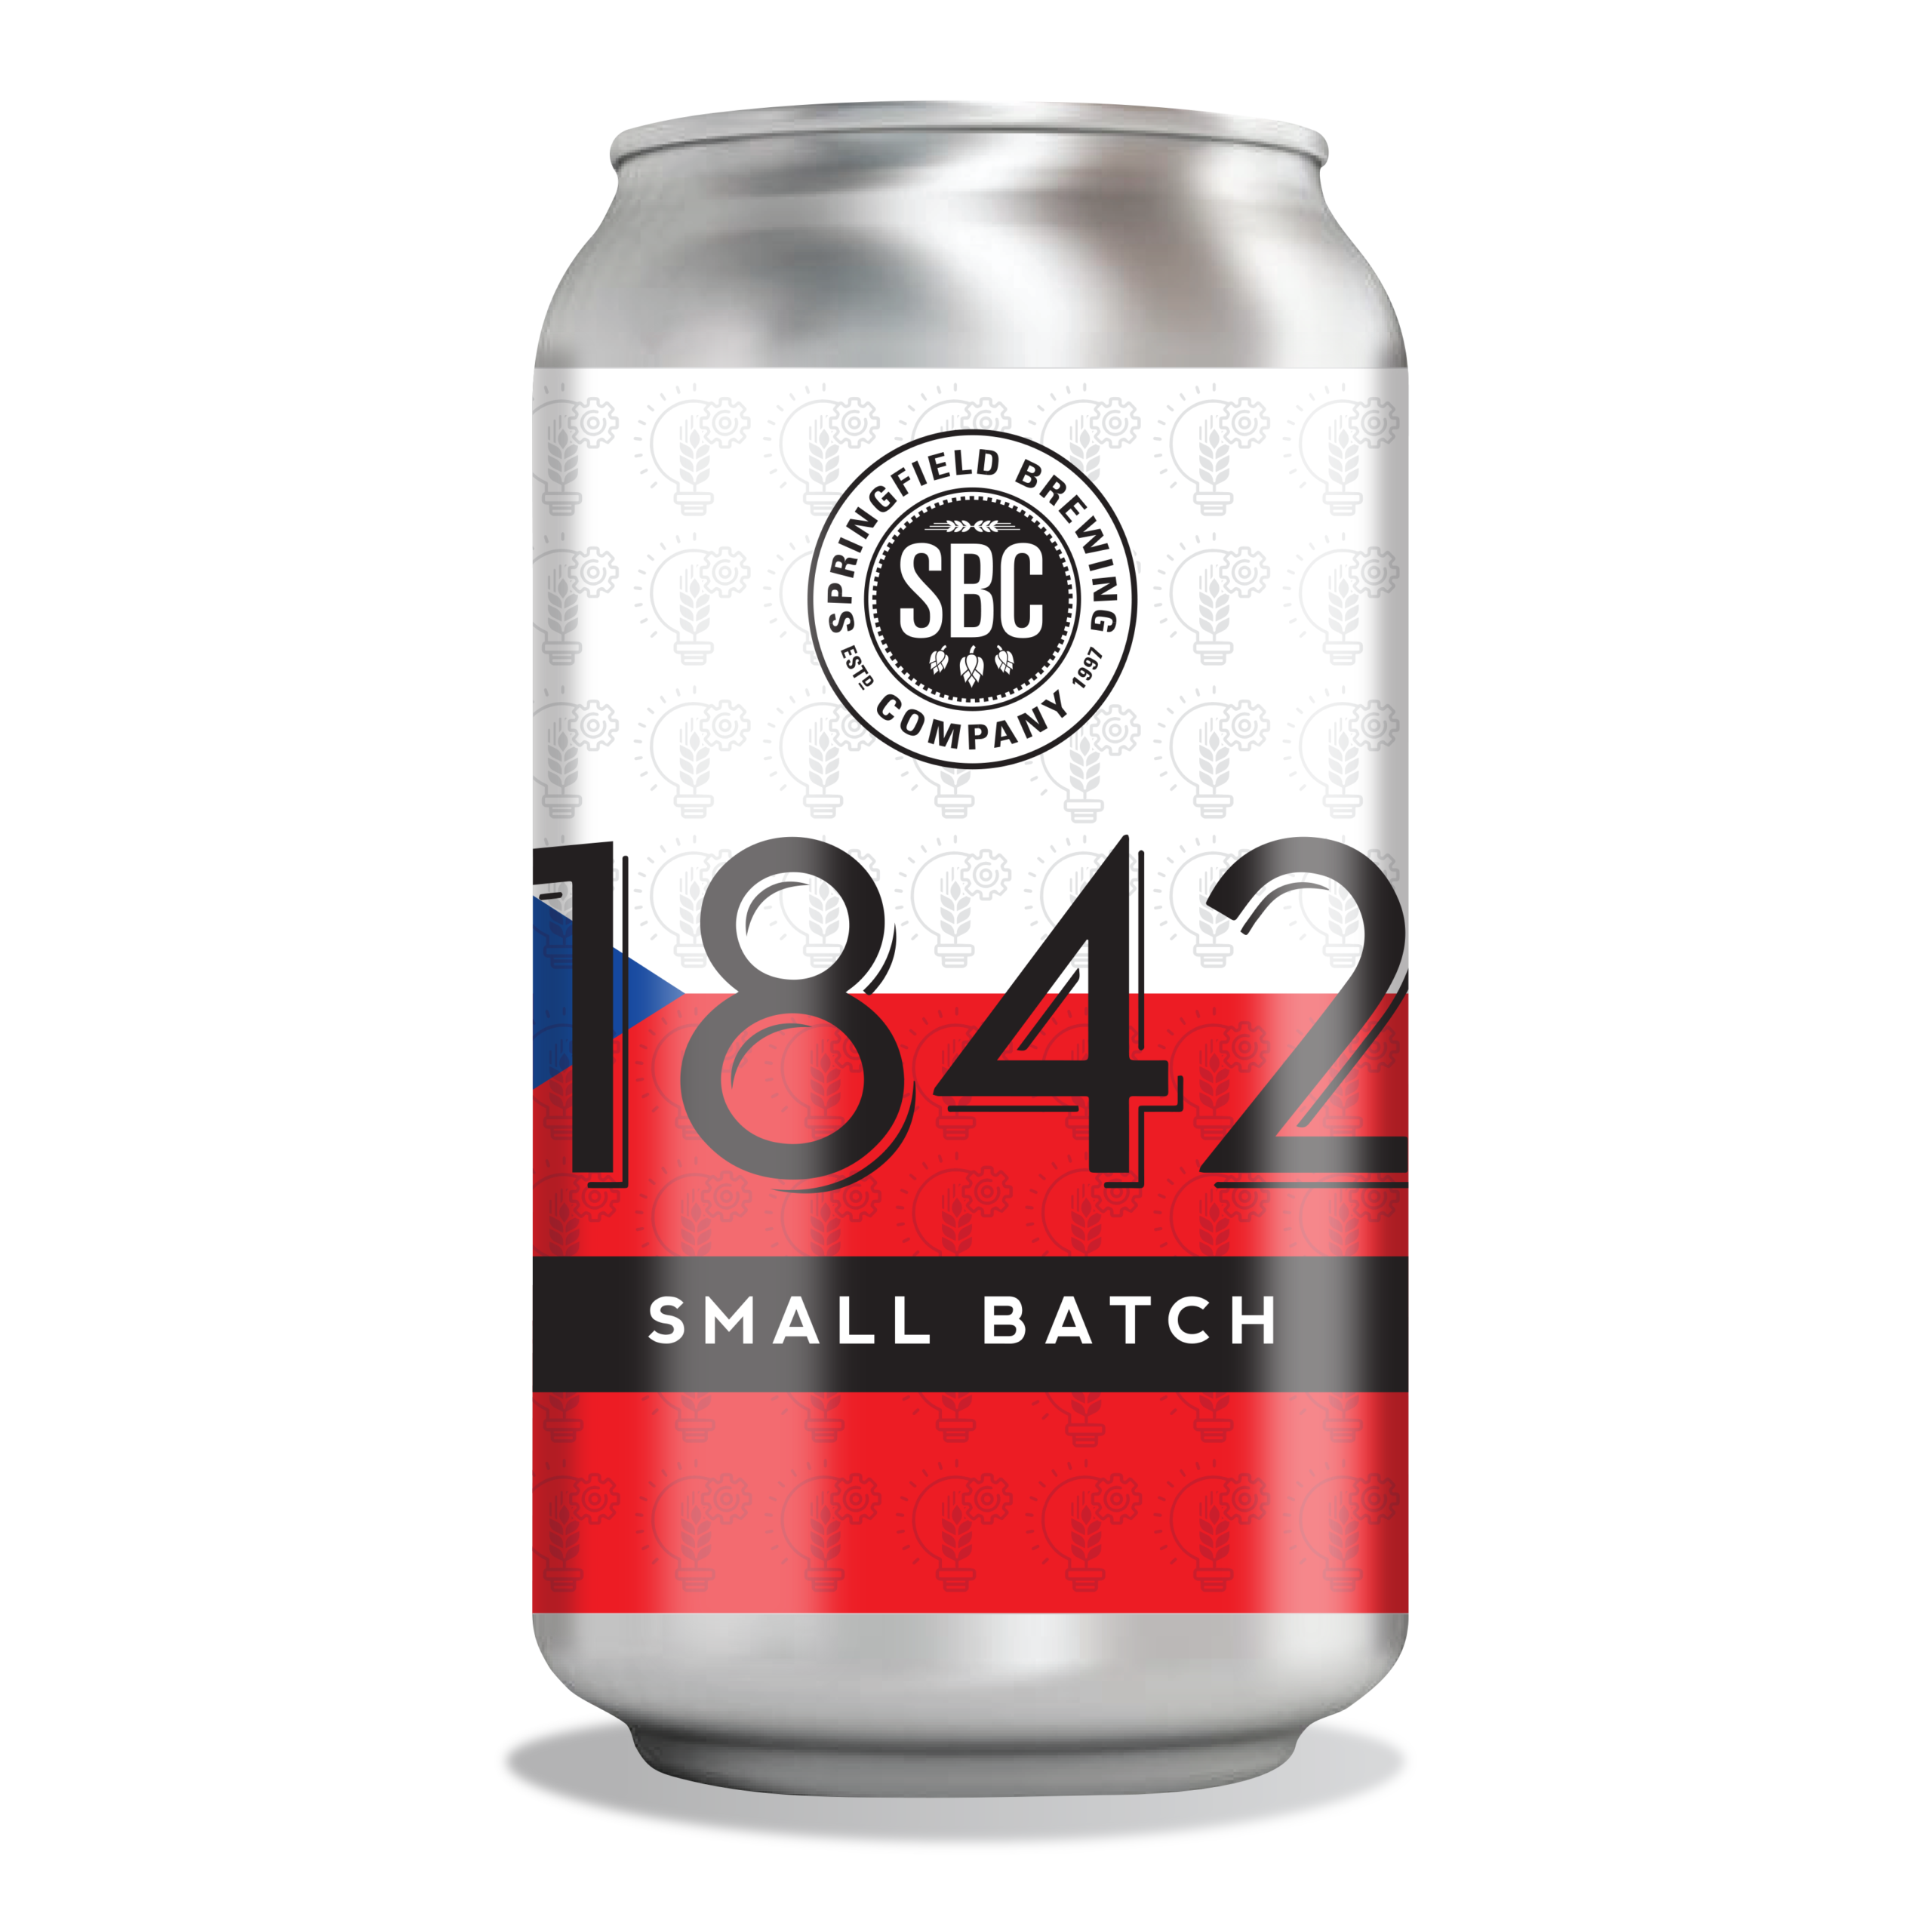 https://brewery.springfieldbrewingco.com/wp-content/uploads/2022/07/1842Update_CanWebsite.png